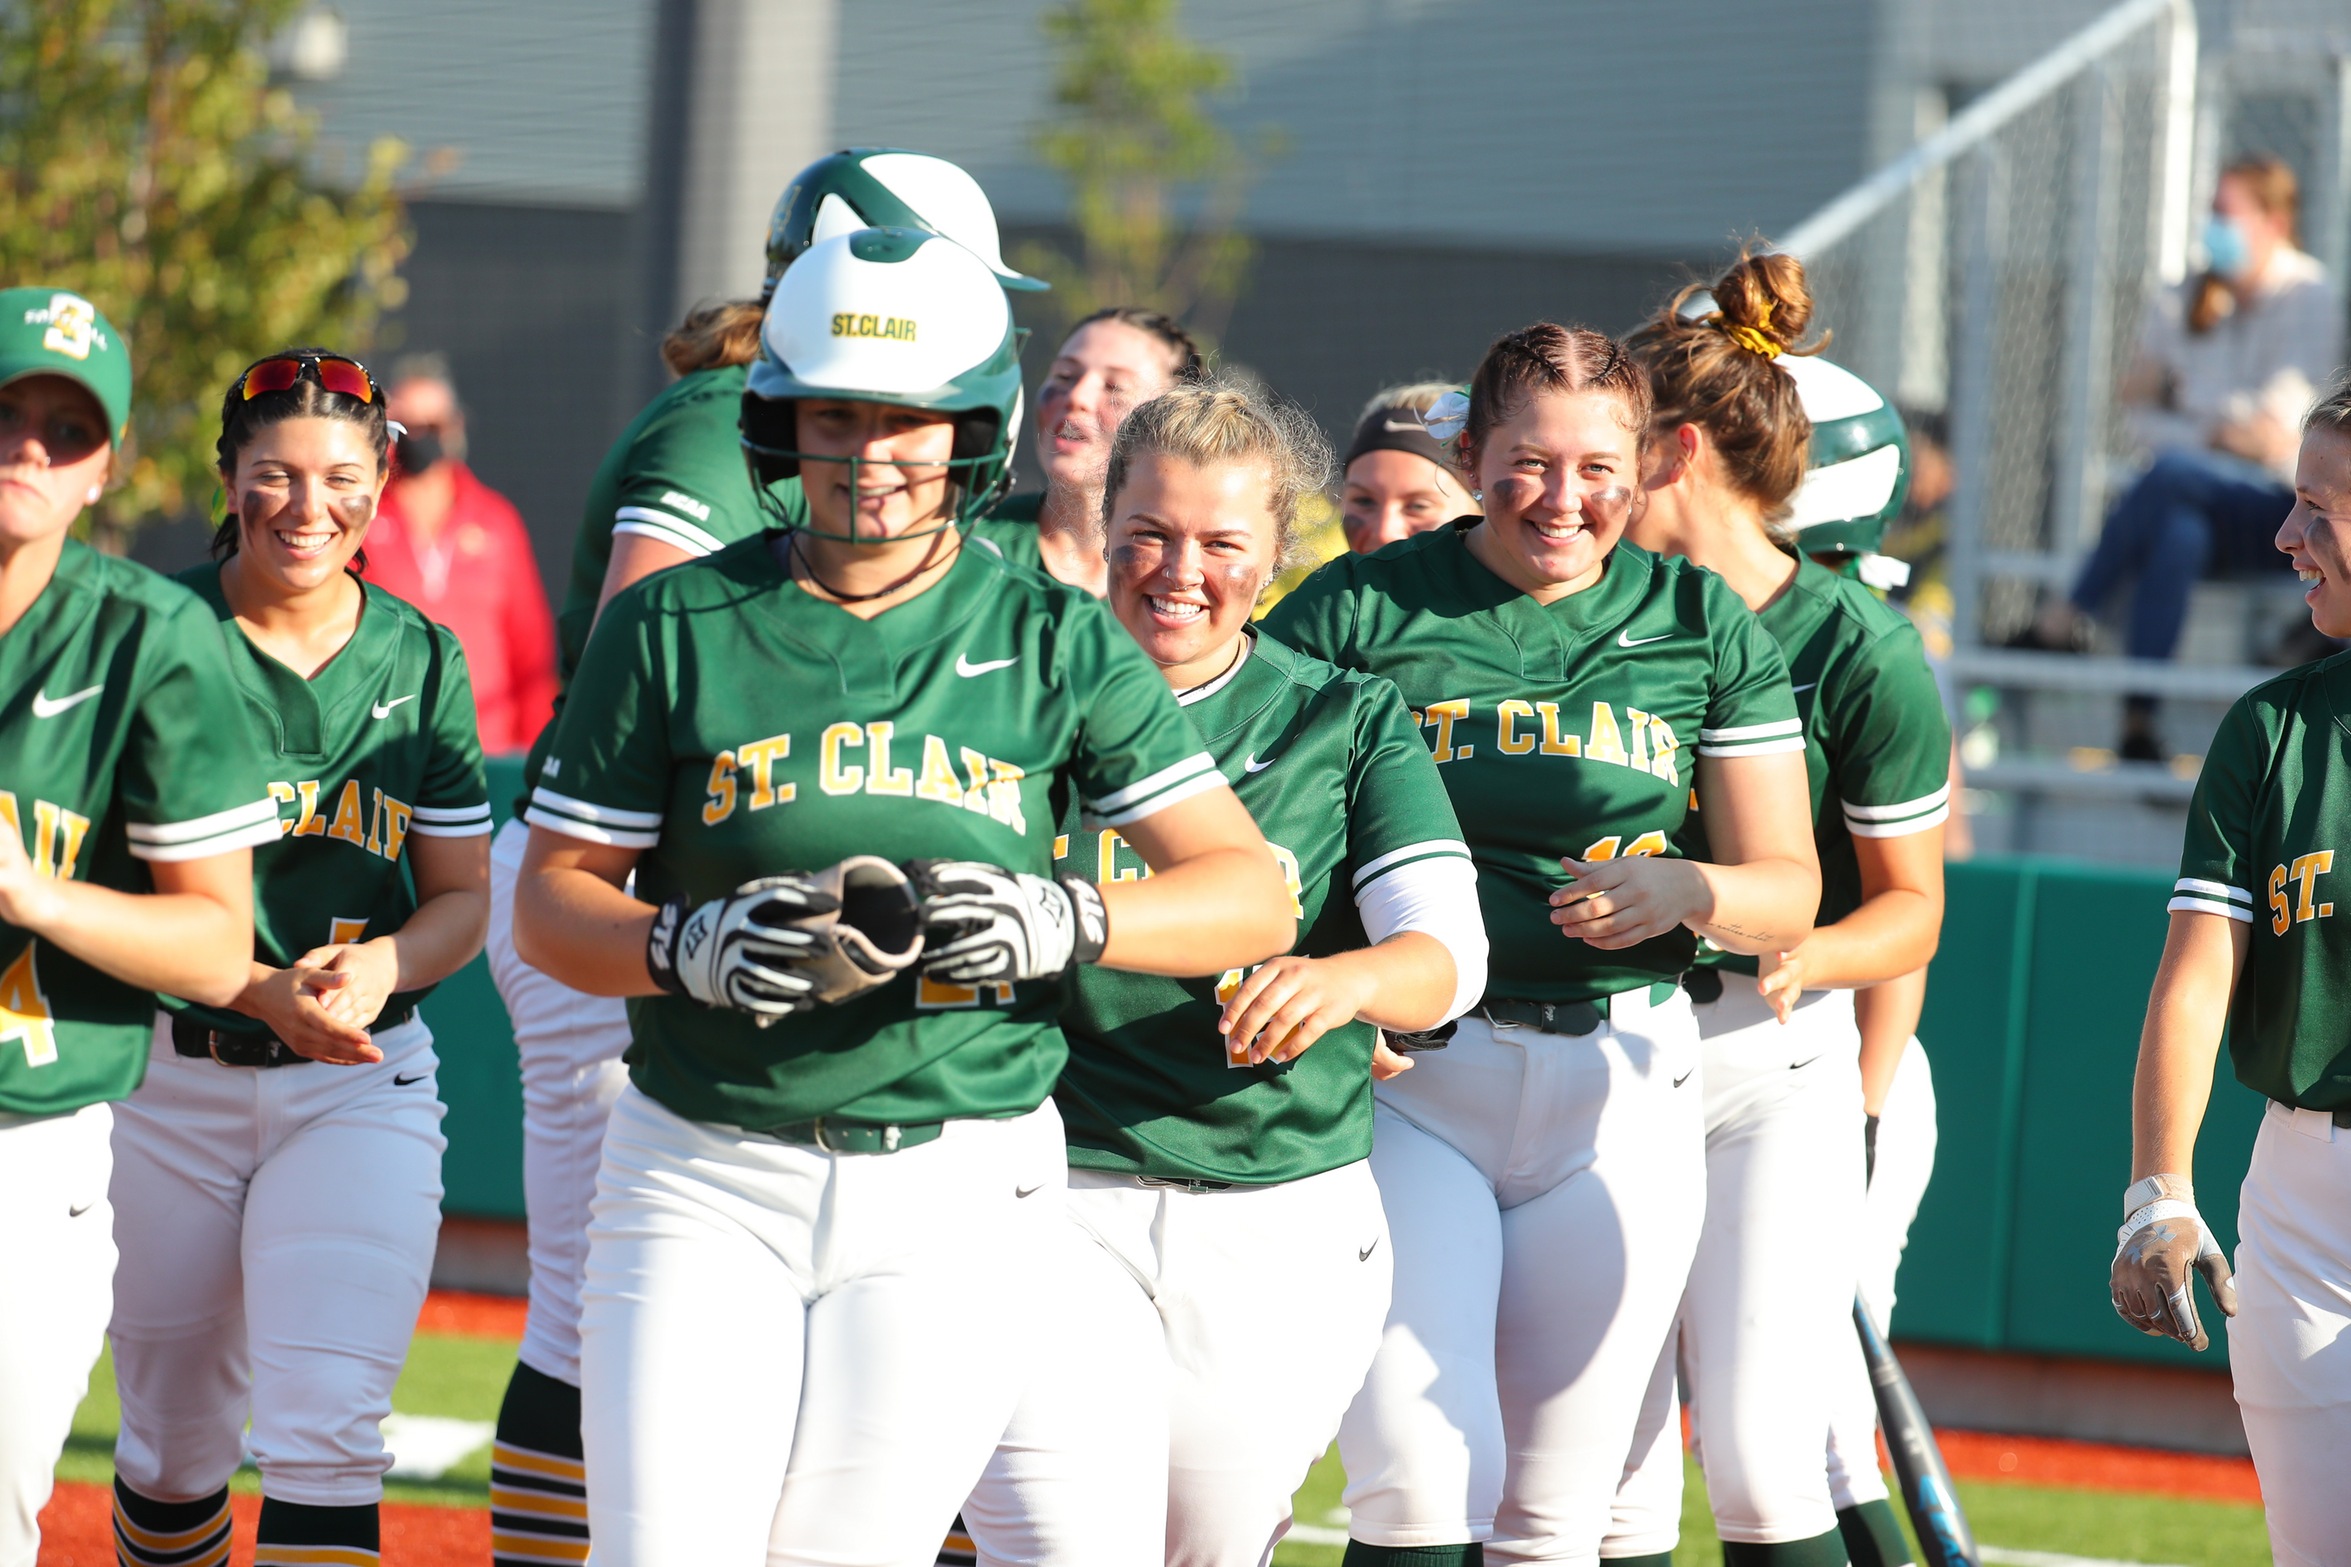 St. Clair Softball Move to 2-2 at After Day Two of CCSA Nationals